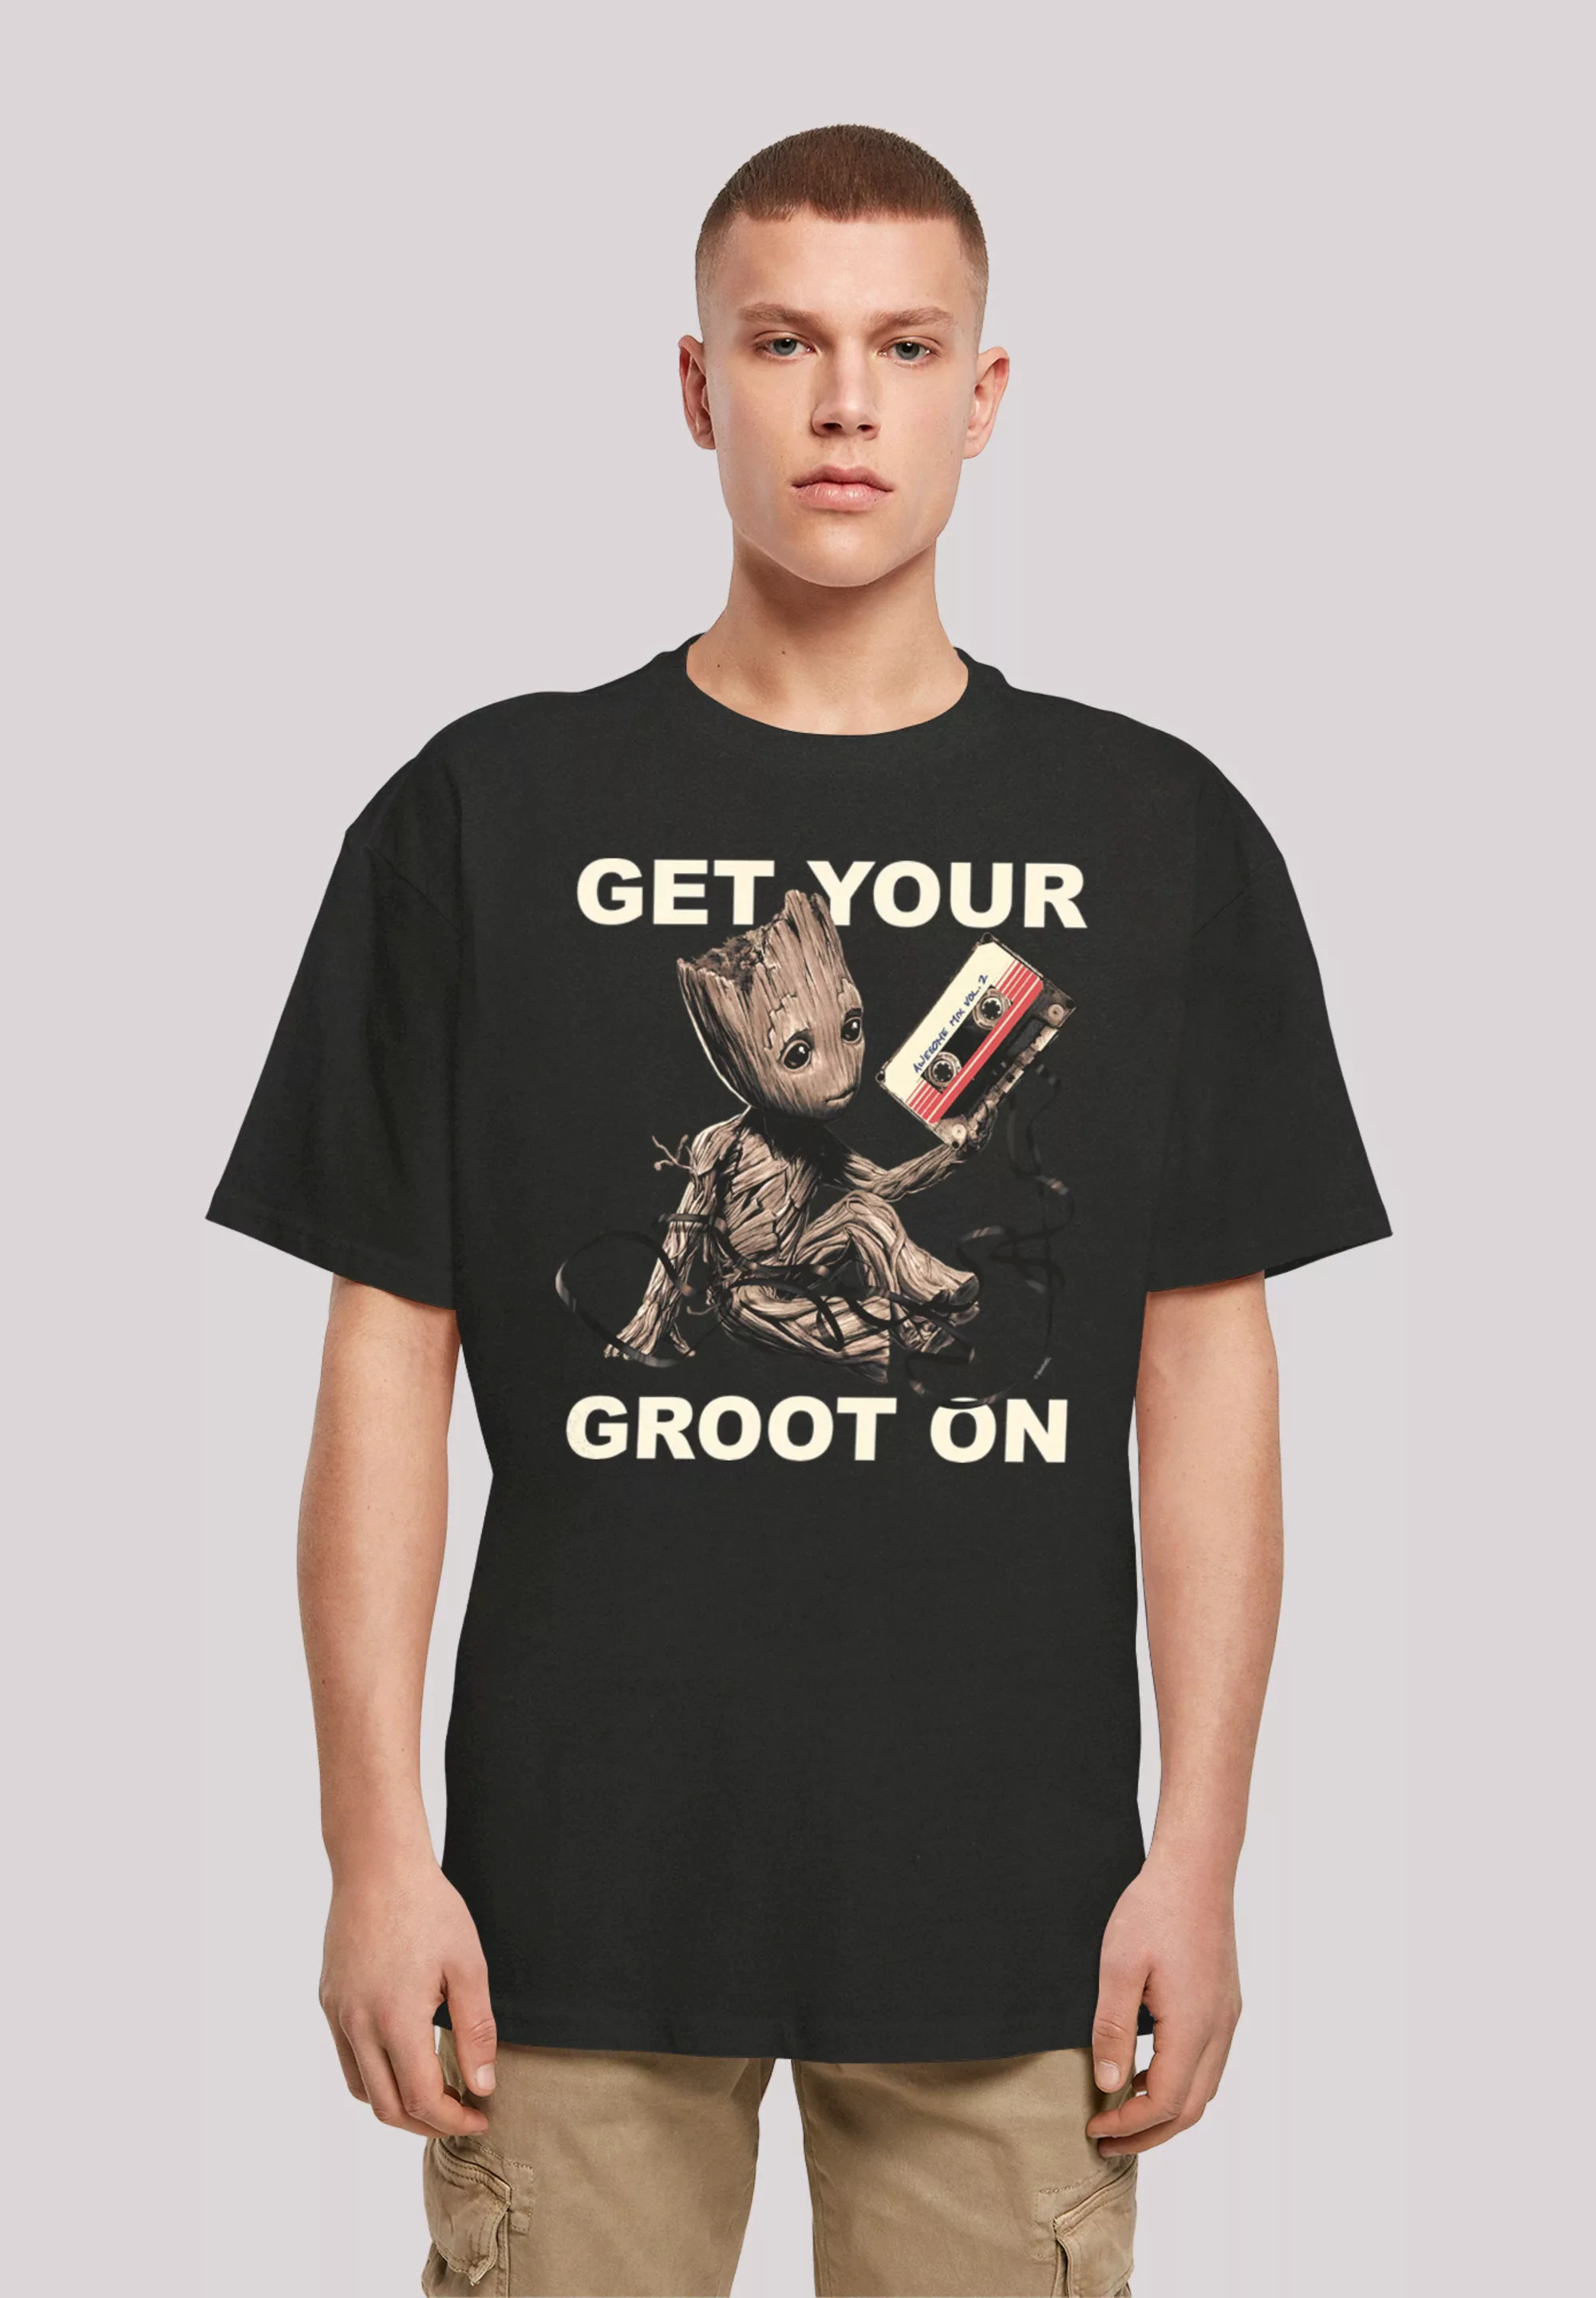 F4NT4STIC T-Shirt "Marvel Guardians of the Galaxy Get your Groot On", Print günstig online kaufen